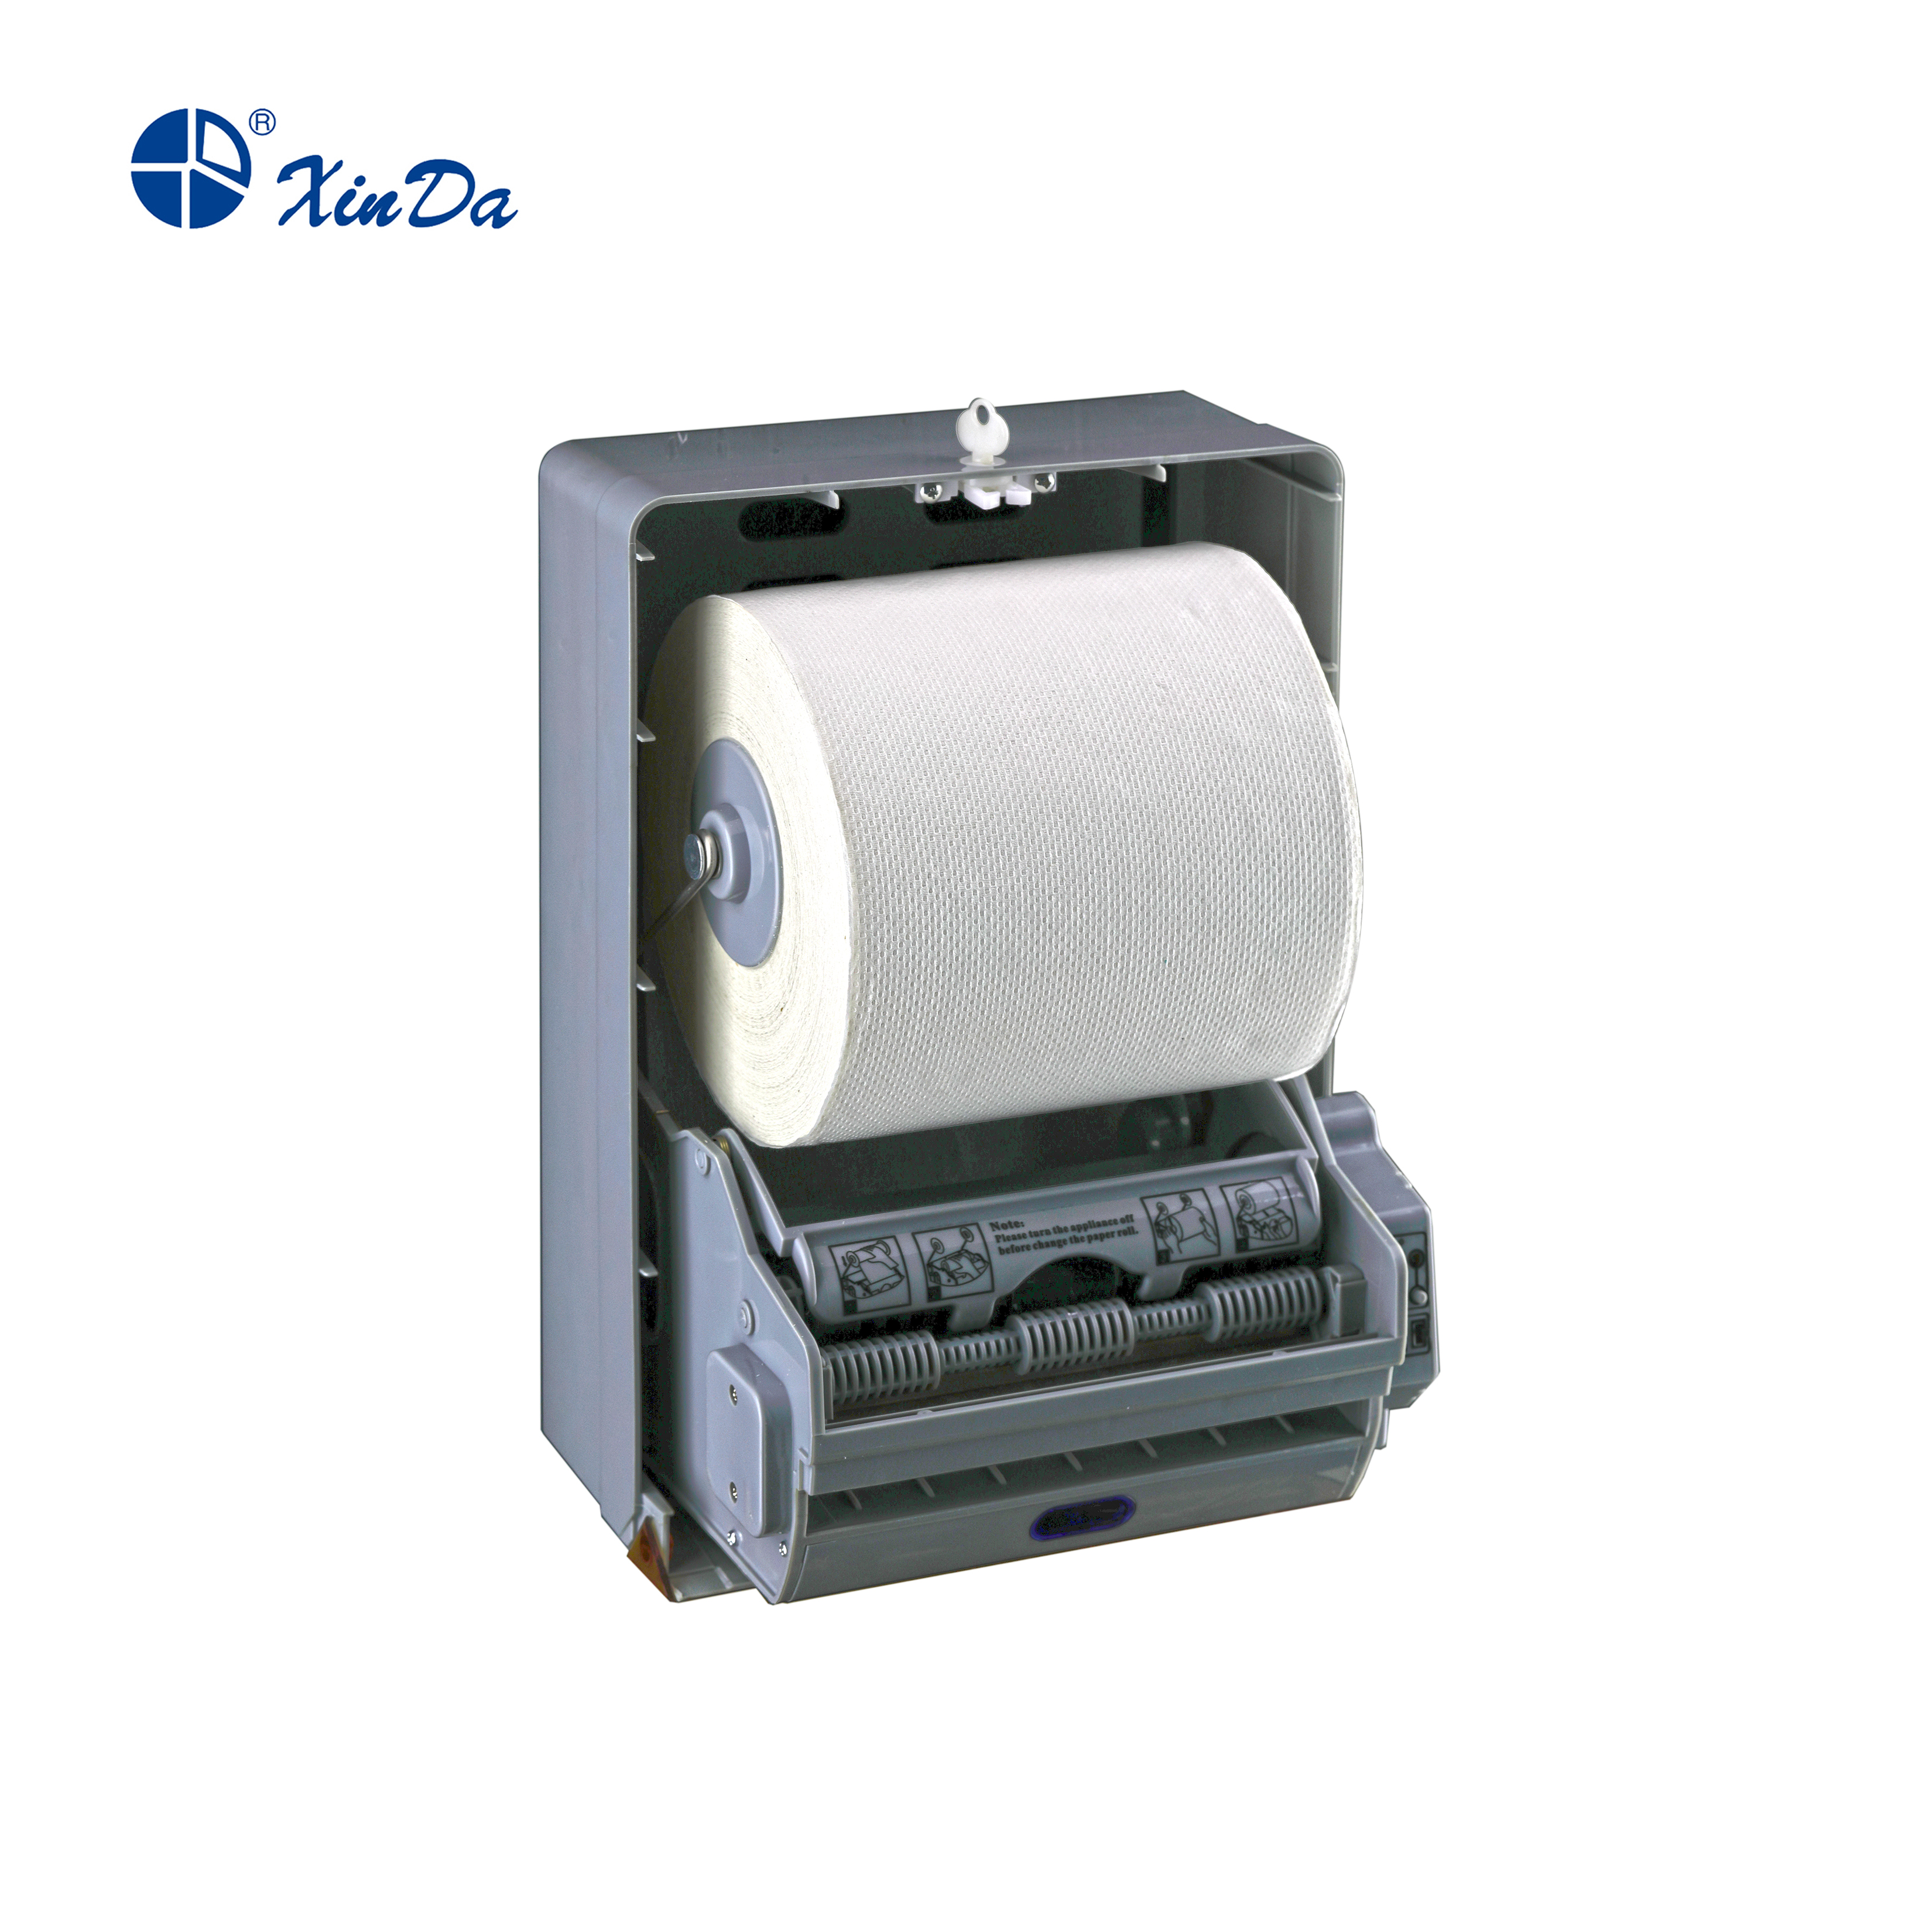 Wall-mounted Plastic Auto Paper Towel Dispenser